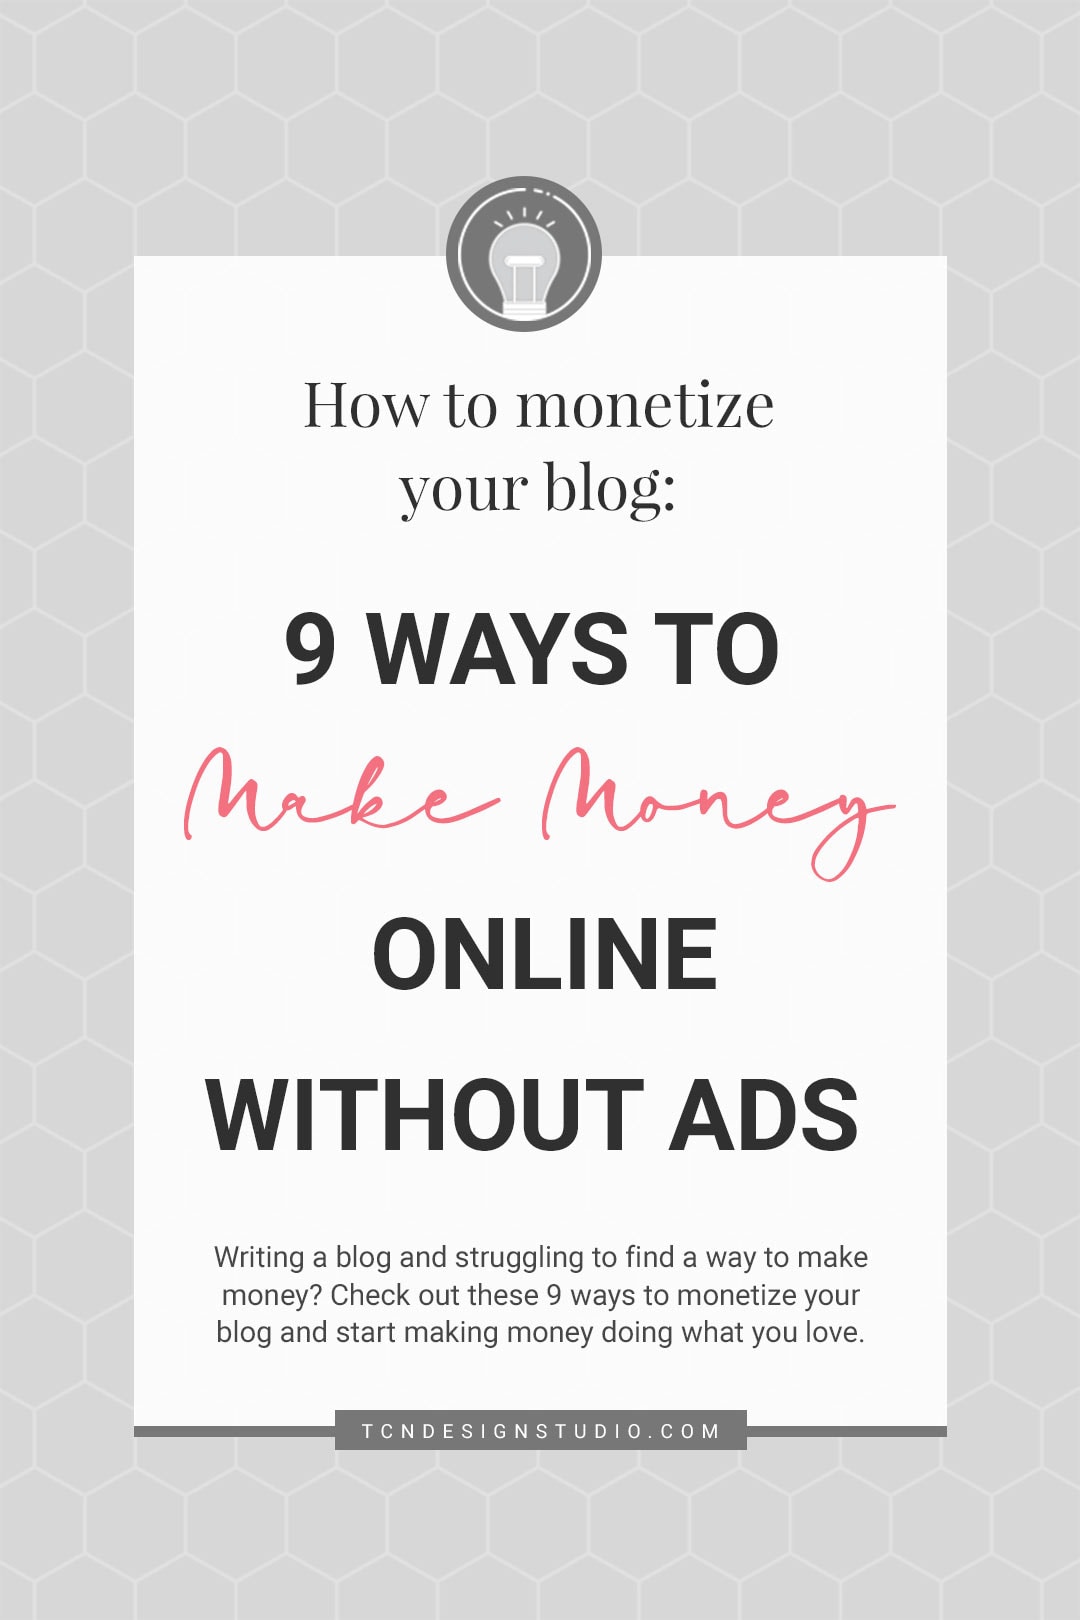 How to Monetize Your Blog: 9 Ways to Make Money Online Without Ads Cover image with Title overlay